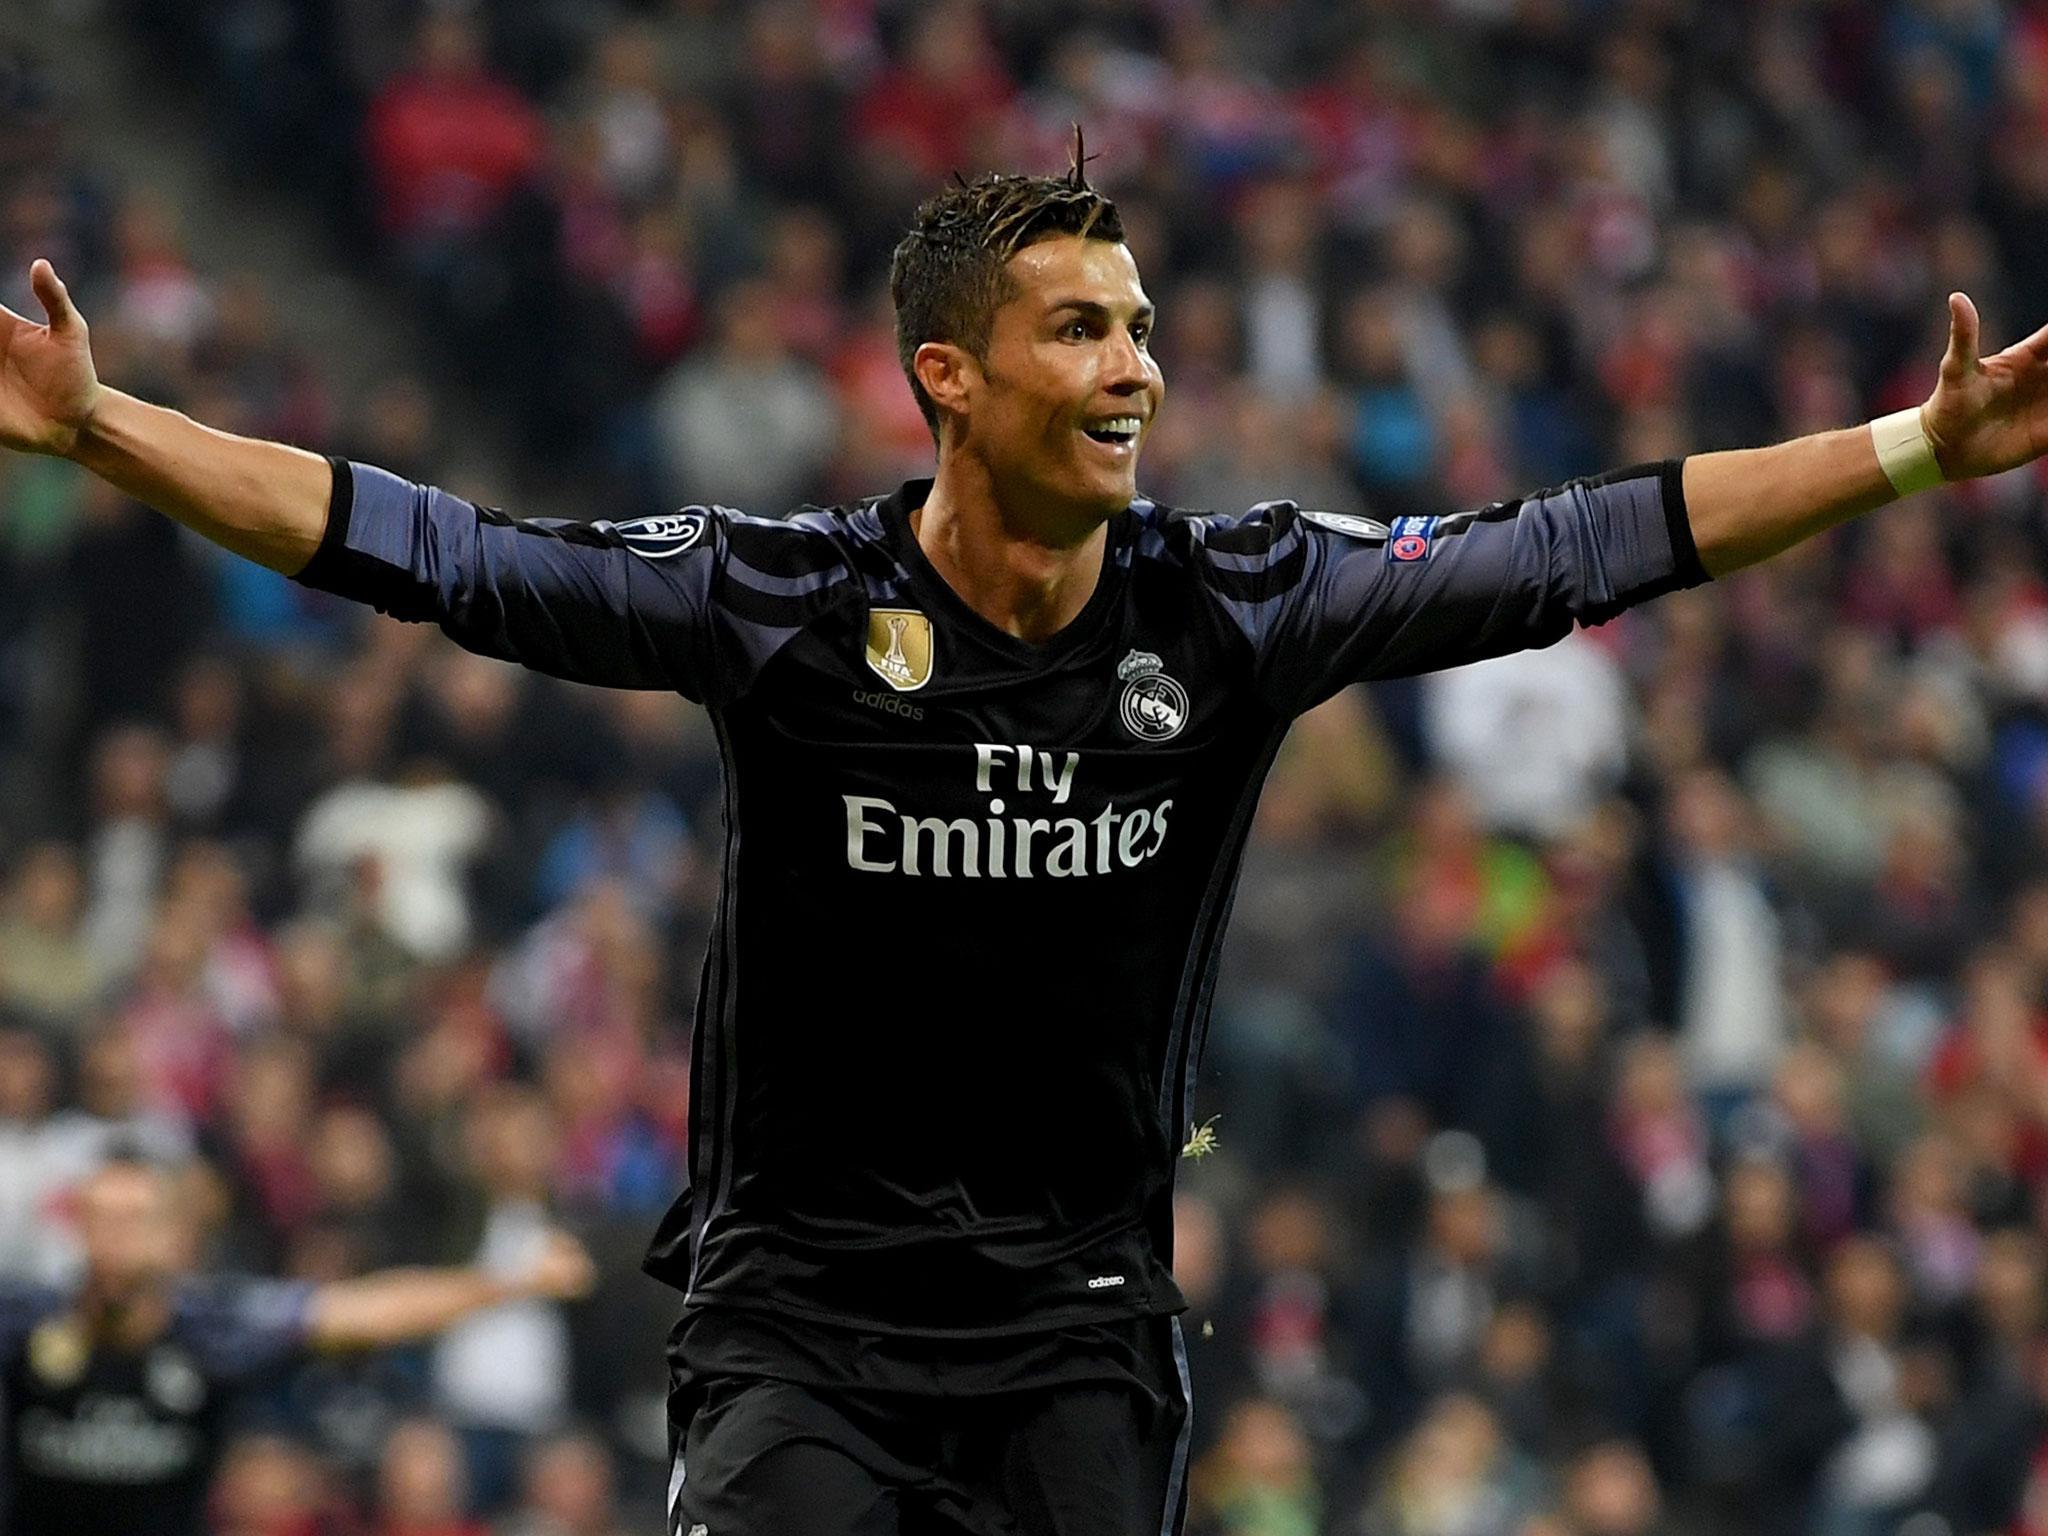 Cristiano Ronaldo was once again Real Madrid's hero when it mattered most